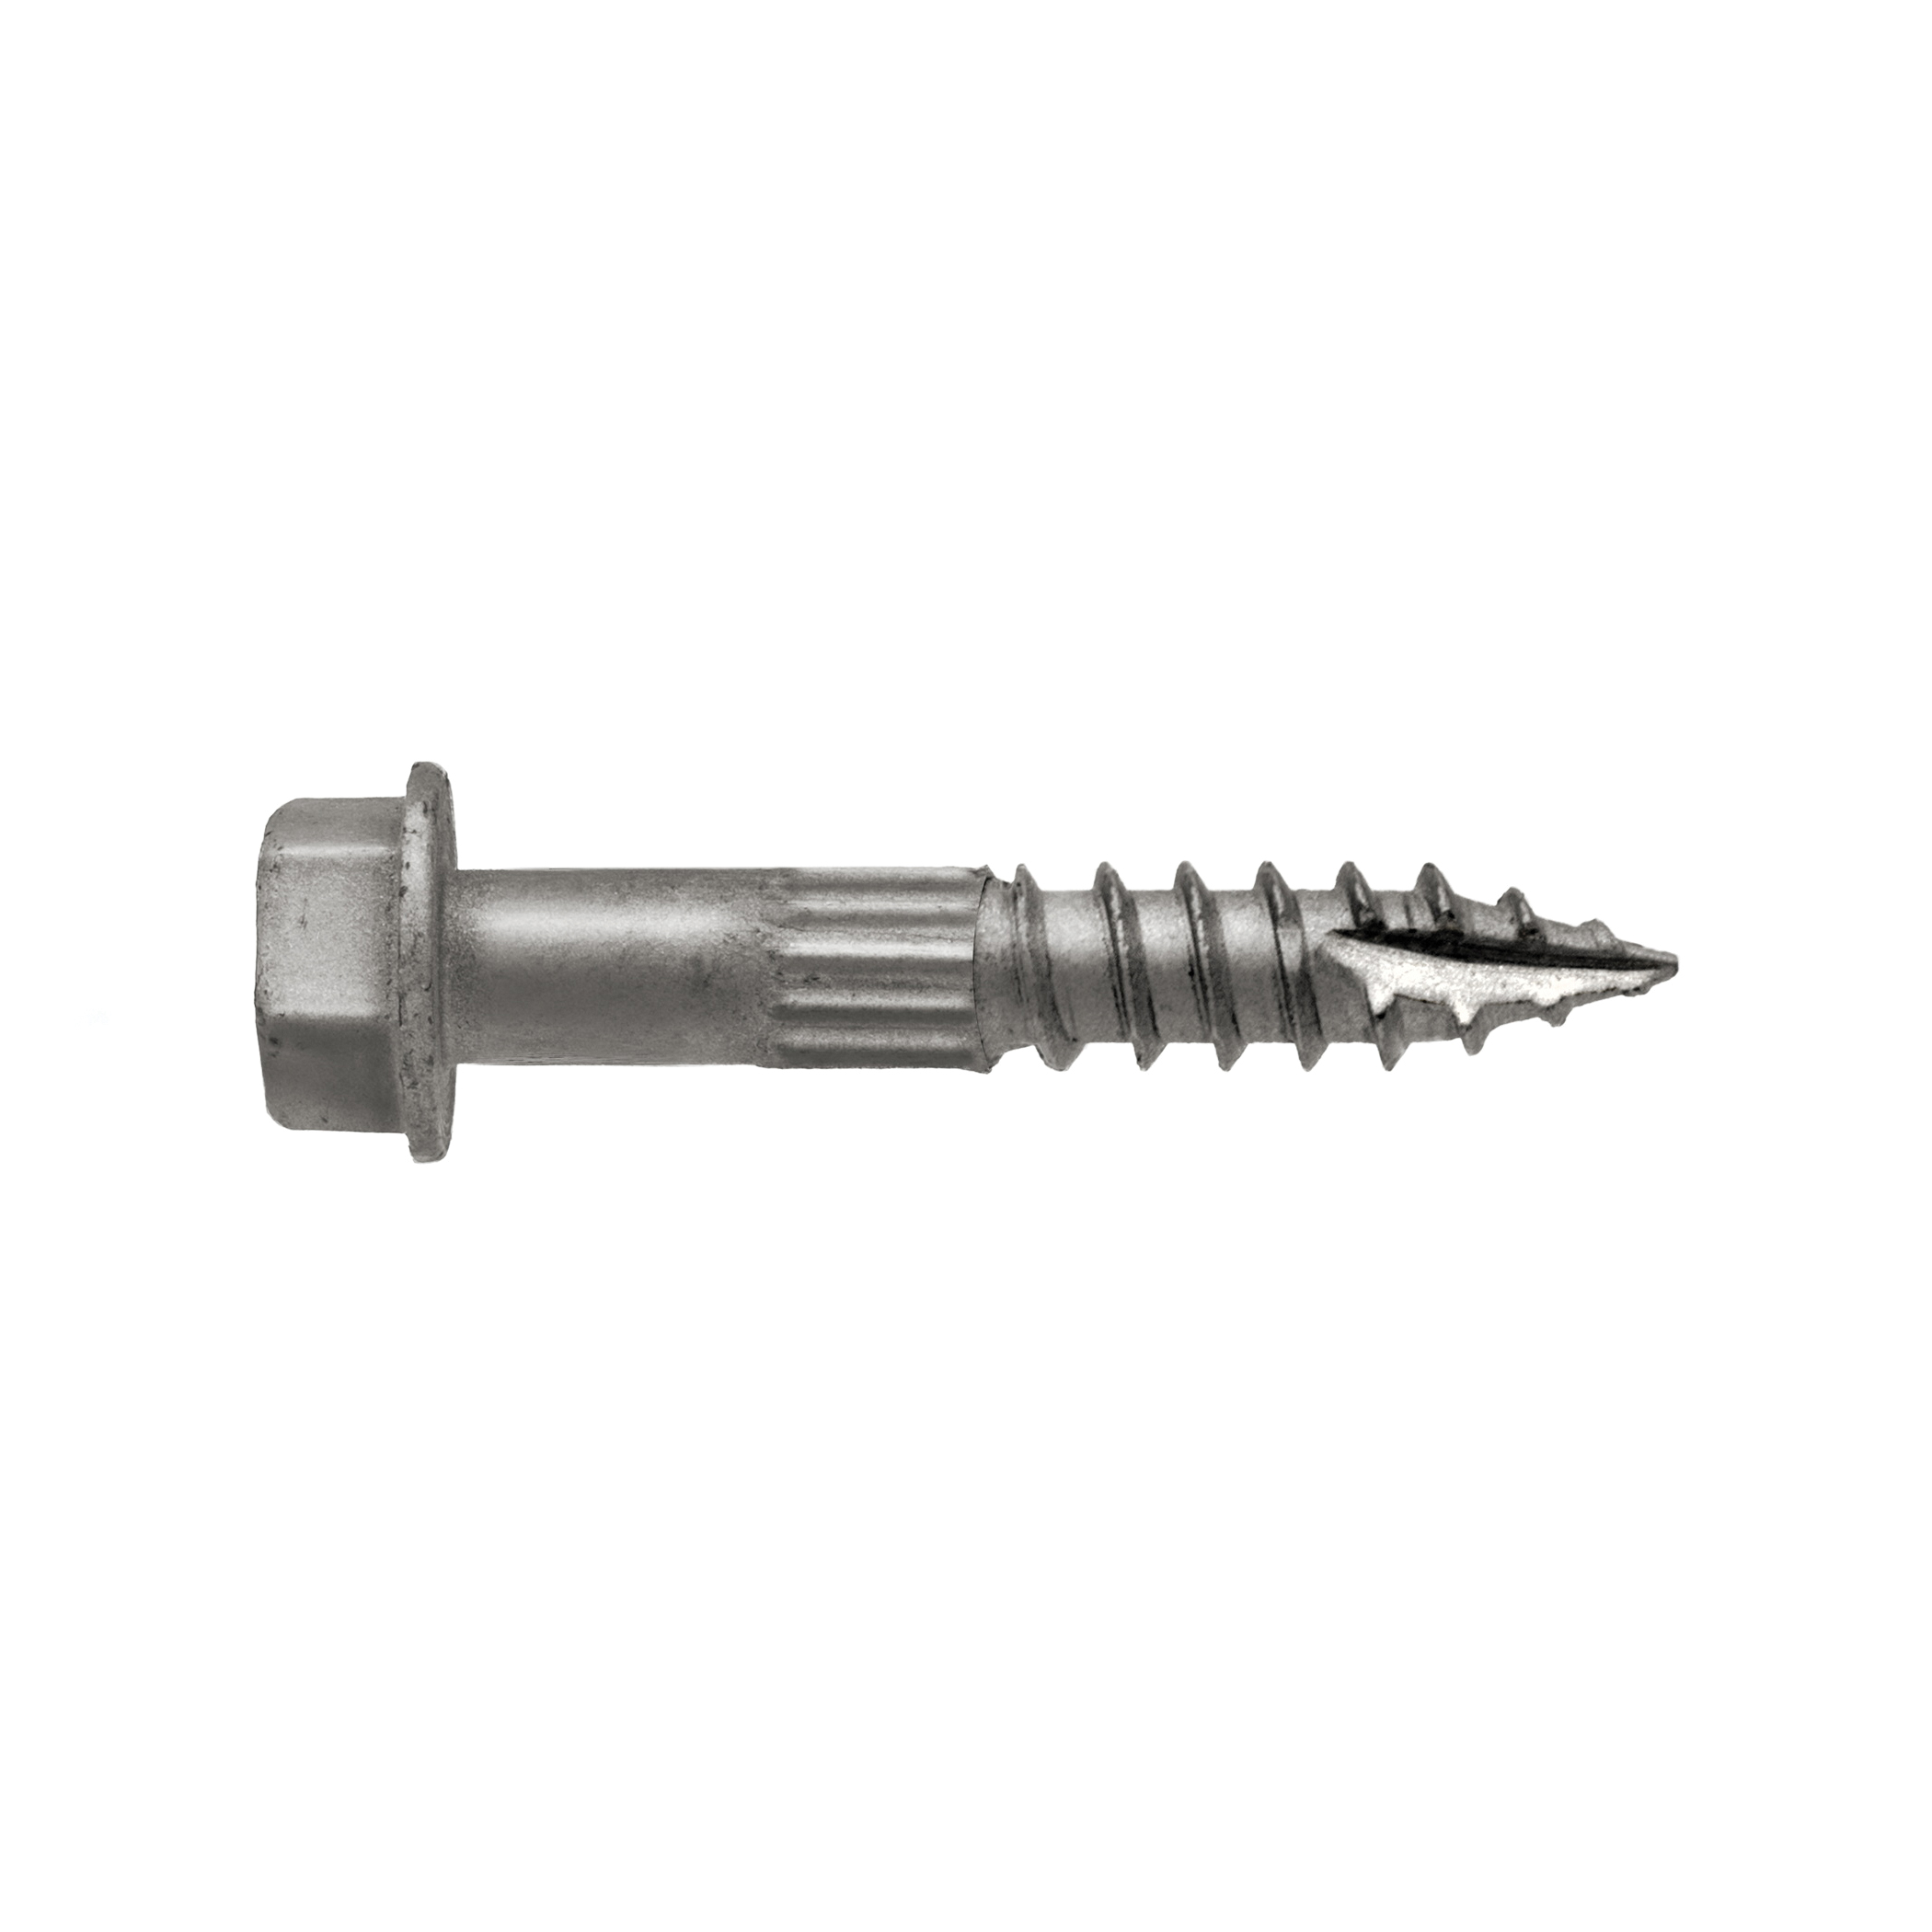 Strong-Drive SDS SDS25112-R25 Connector Screw, 1-1/2 in L, Serrated Thread, Hex Head, Hex Drive